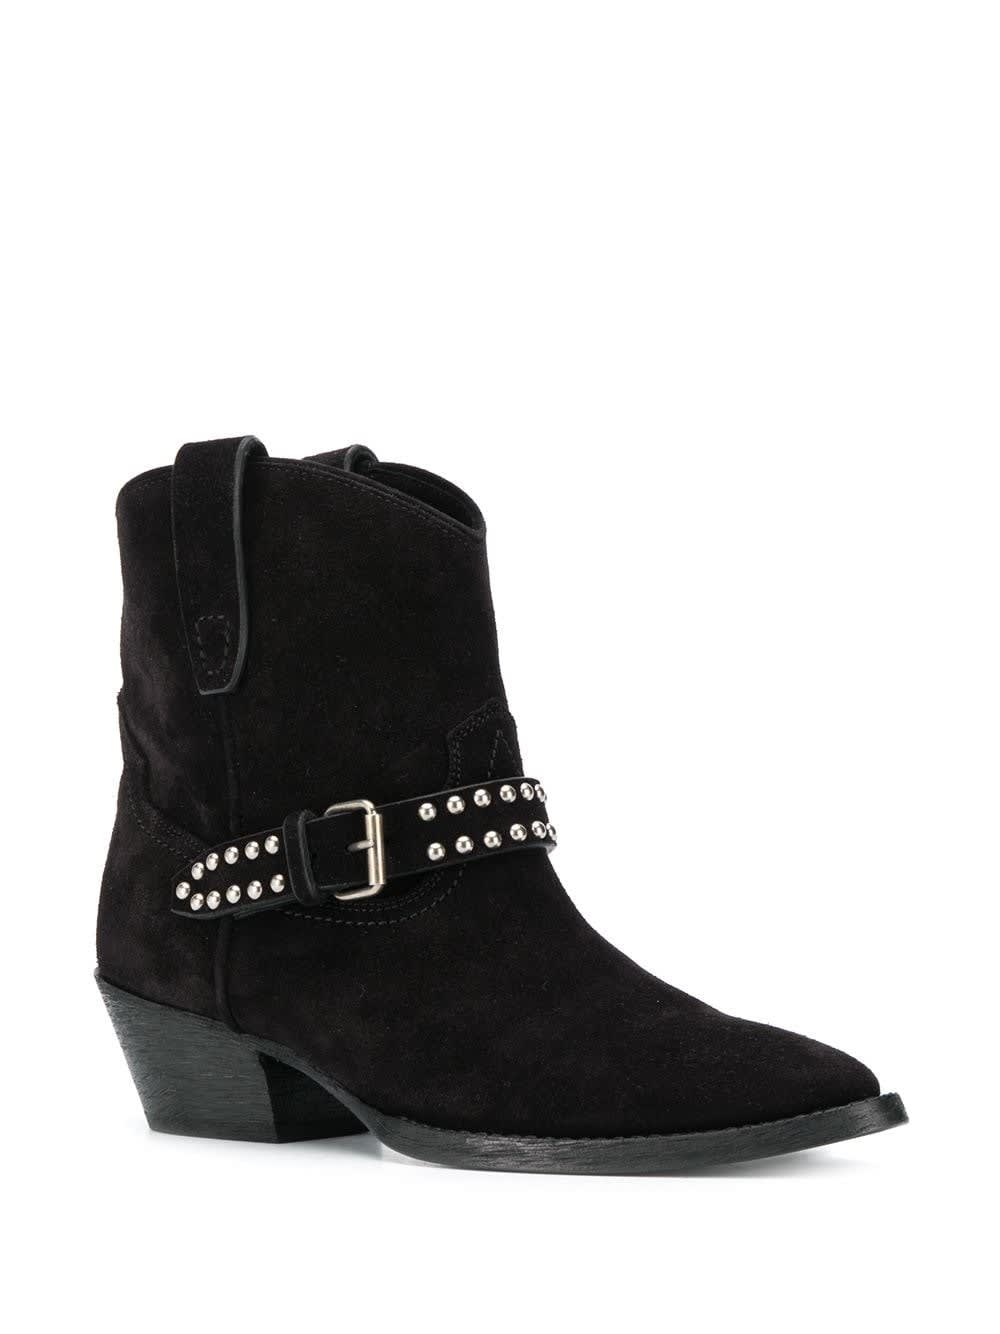 Saint Laurent Suede Ankle Boots With Studs And Buckles